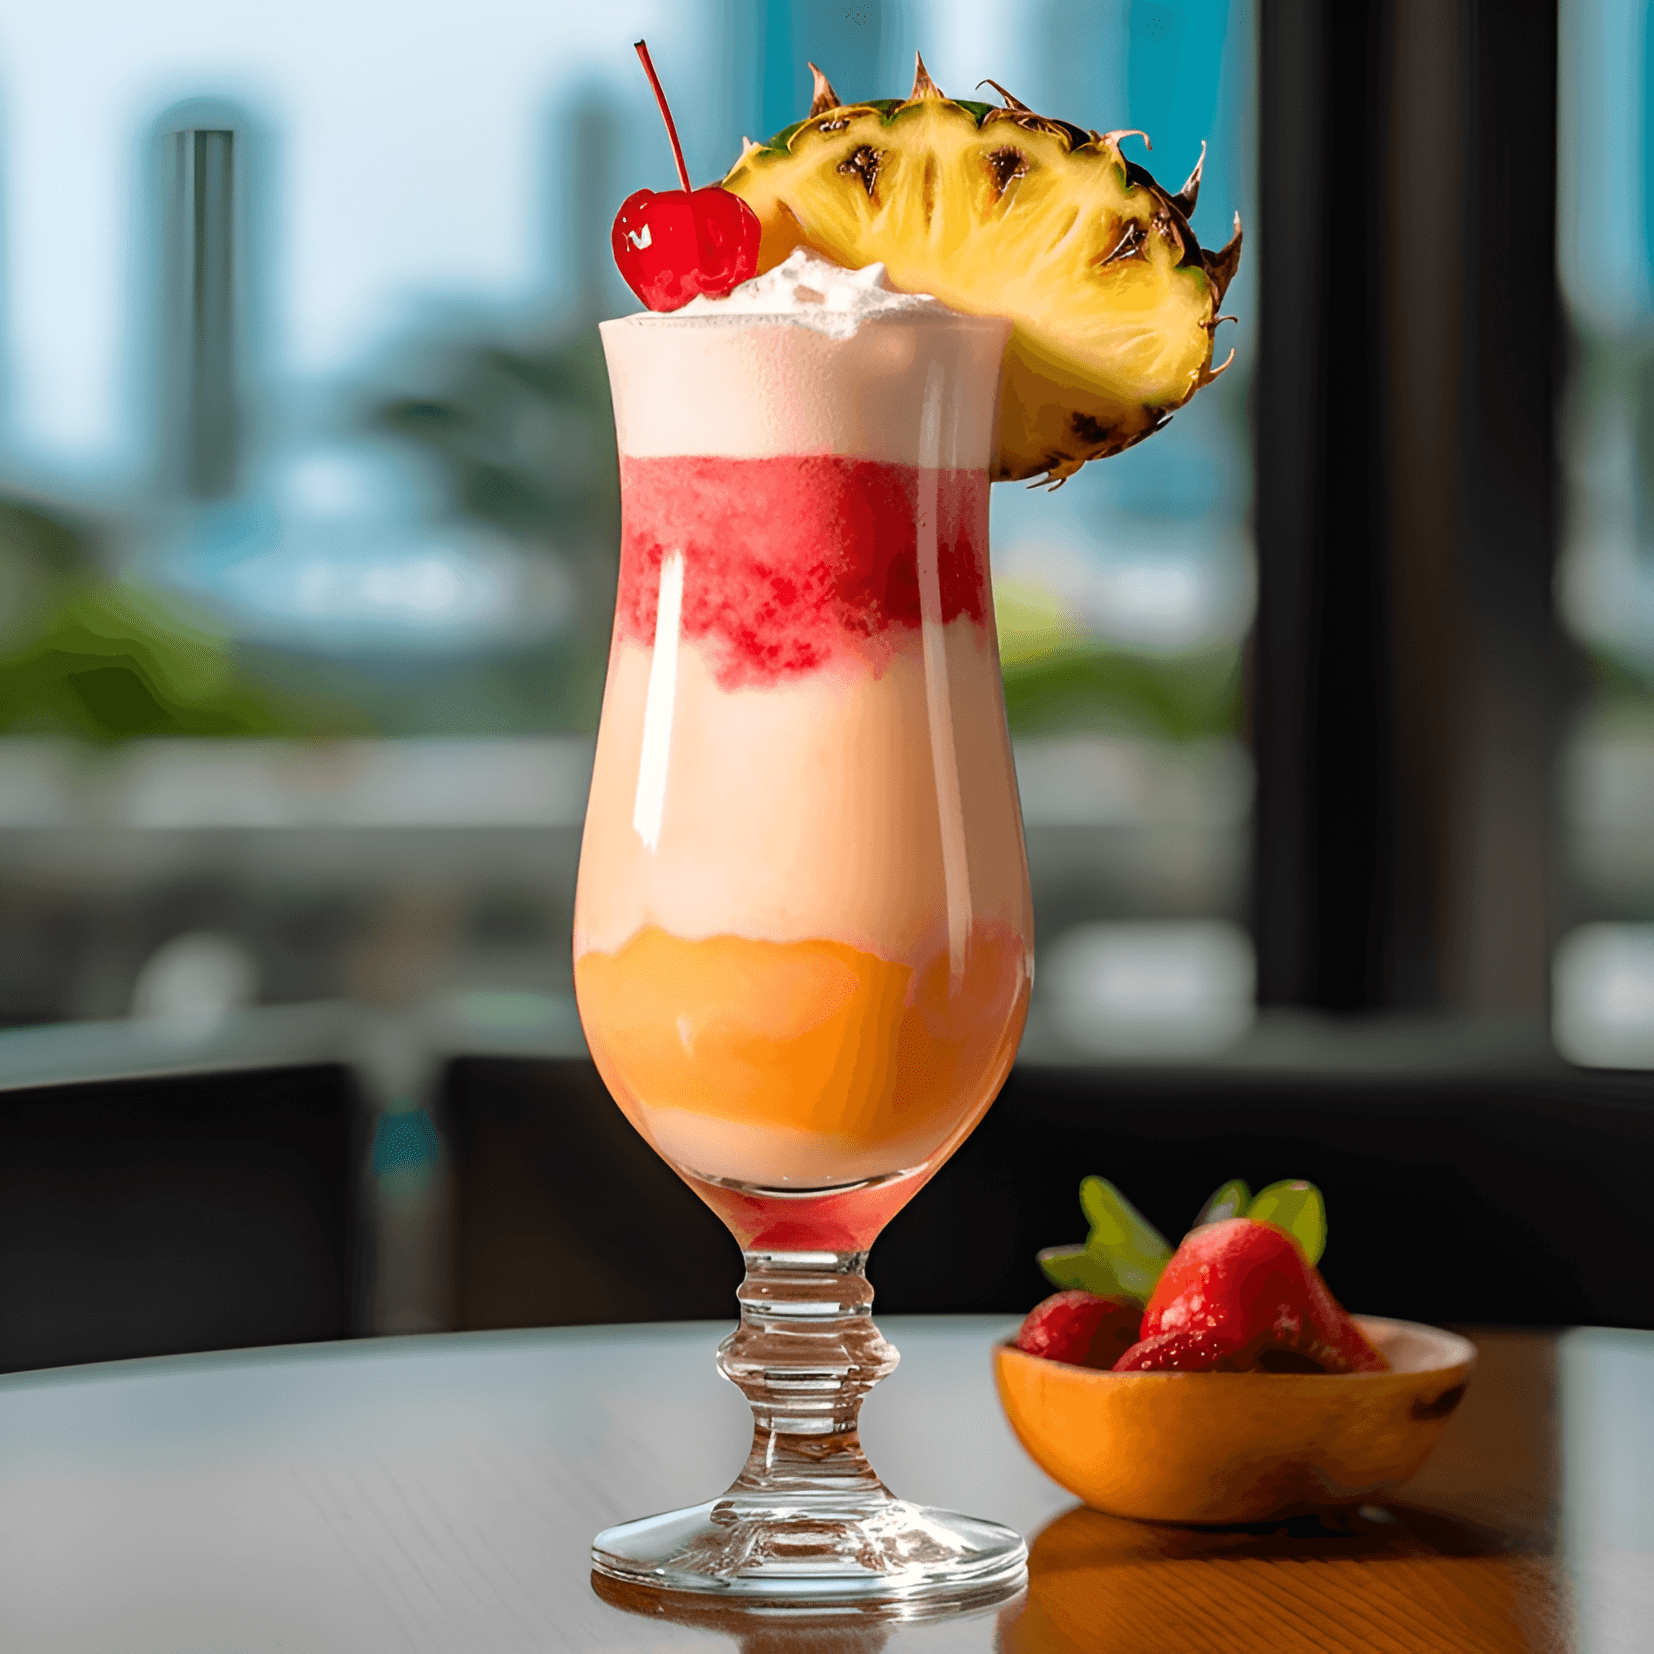 Miami Cocktail Recipe - The Miami cocktail has a sweet and fruity taste, with a hint of tartness from the strawberries. The creamy coconut and pineapple flavors from the Piña Colada blend perfectly with the tangy strawberry and rum notes of the Strawberry Daiquiri, creating a refreshing and well-balanced drink.